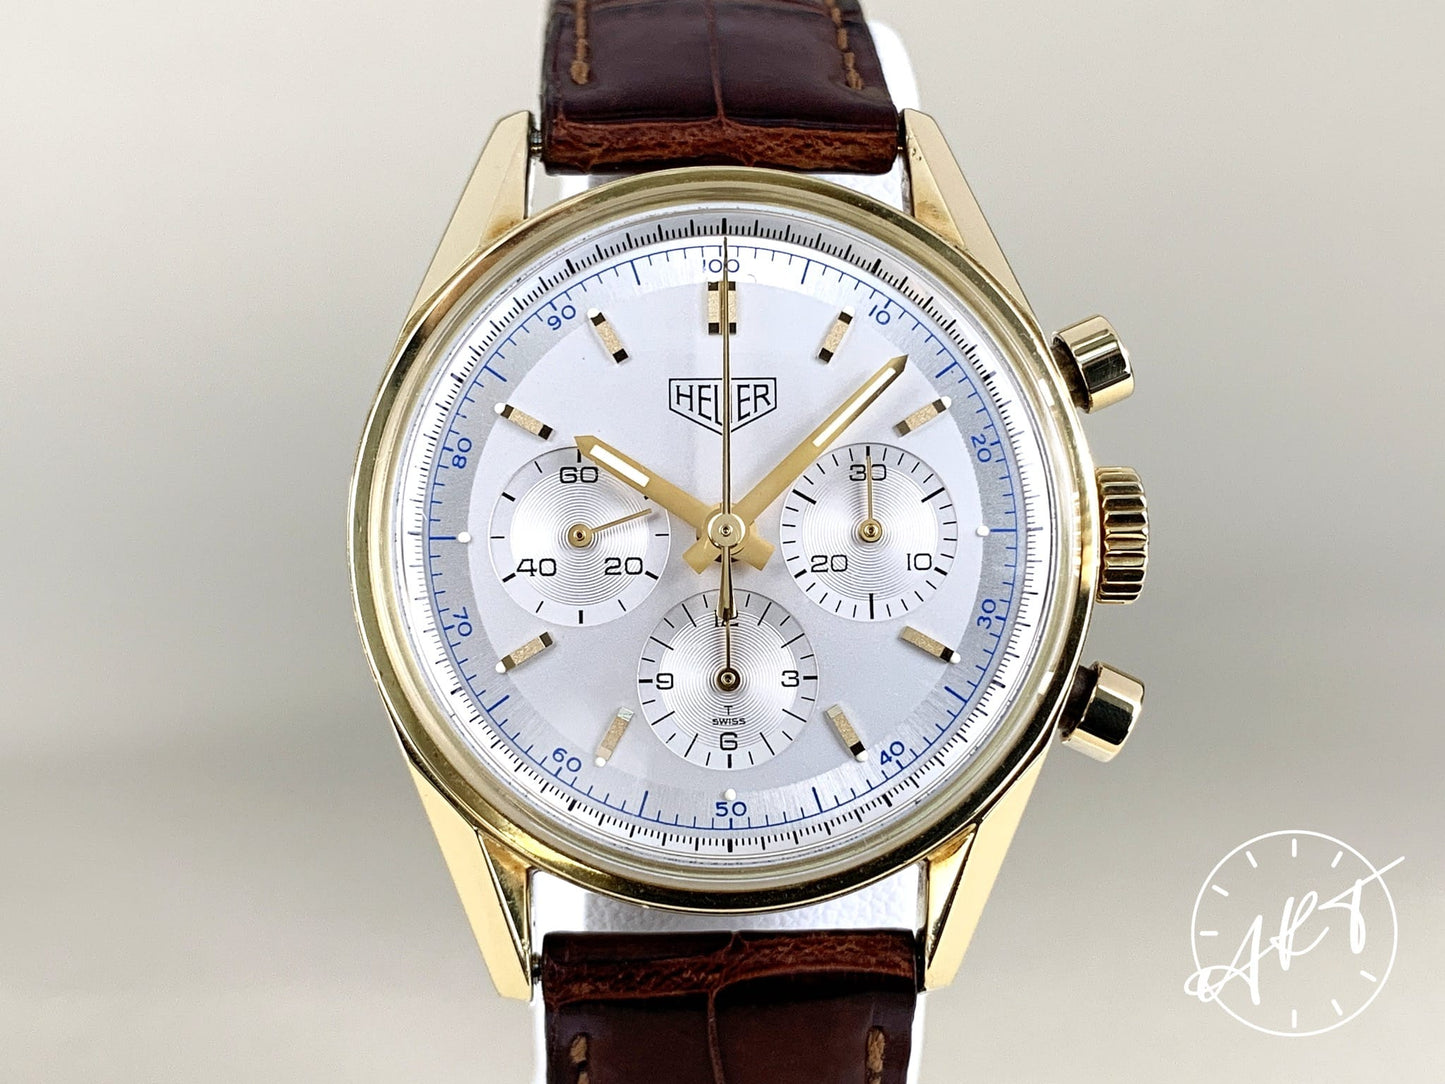 Tag Heuer Carrera Chrono Silver Dial 18K Gold 1964 Re-Edition Watch CS3140